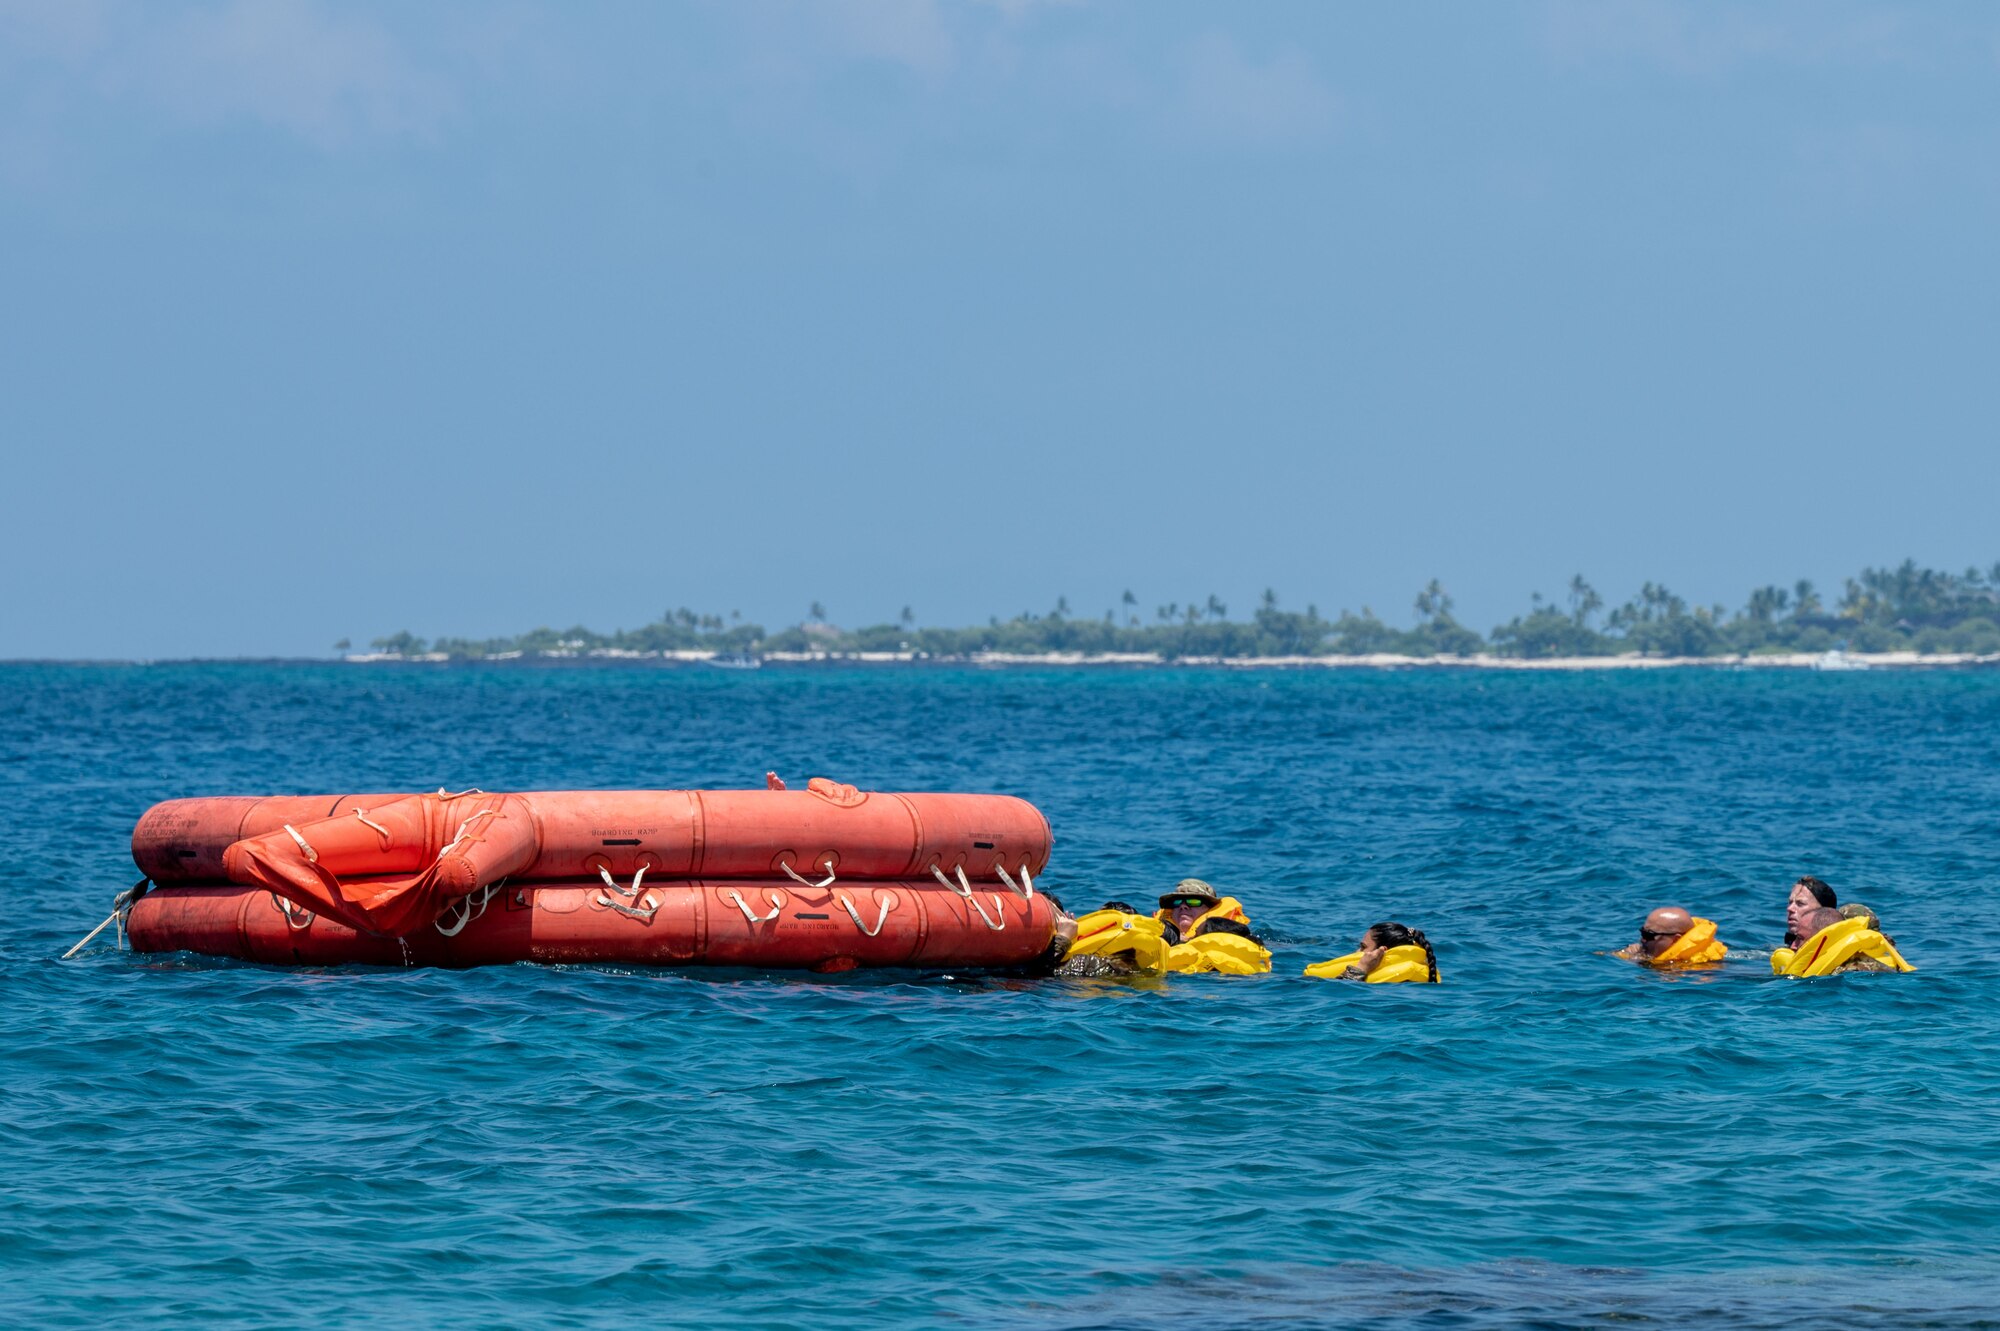 Airmen swim to a raft in the ocean during survival training.